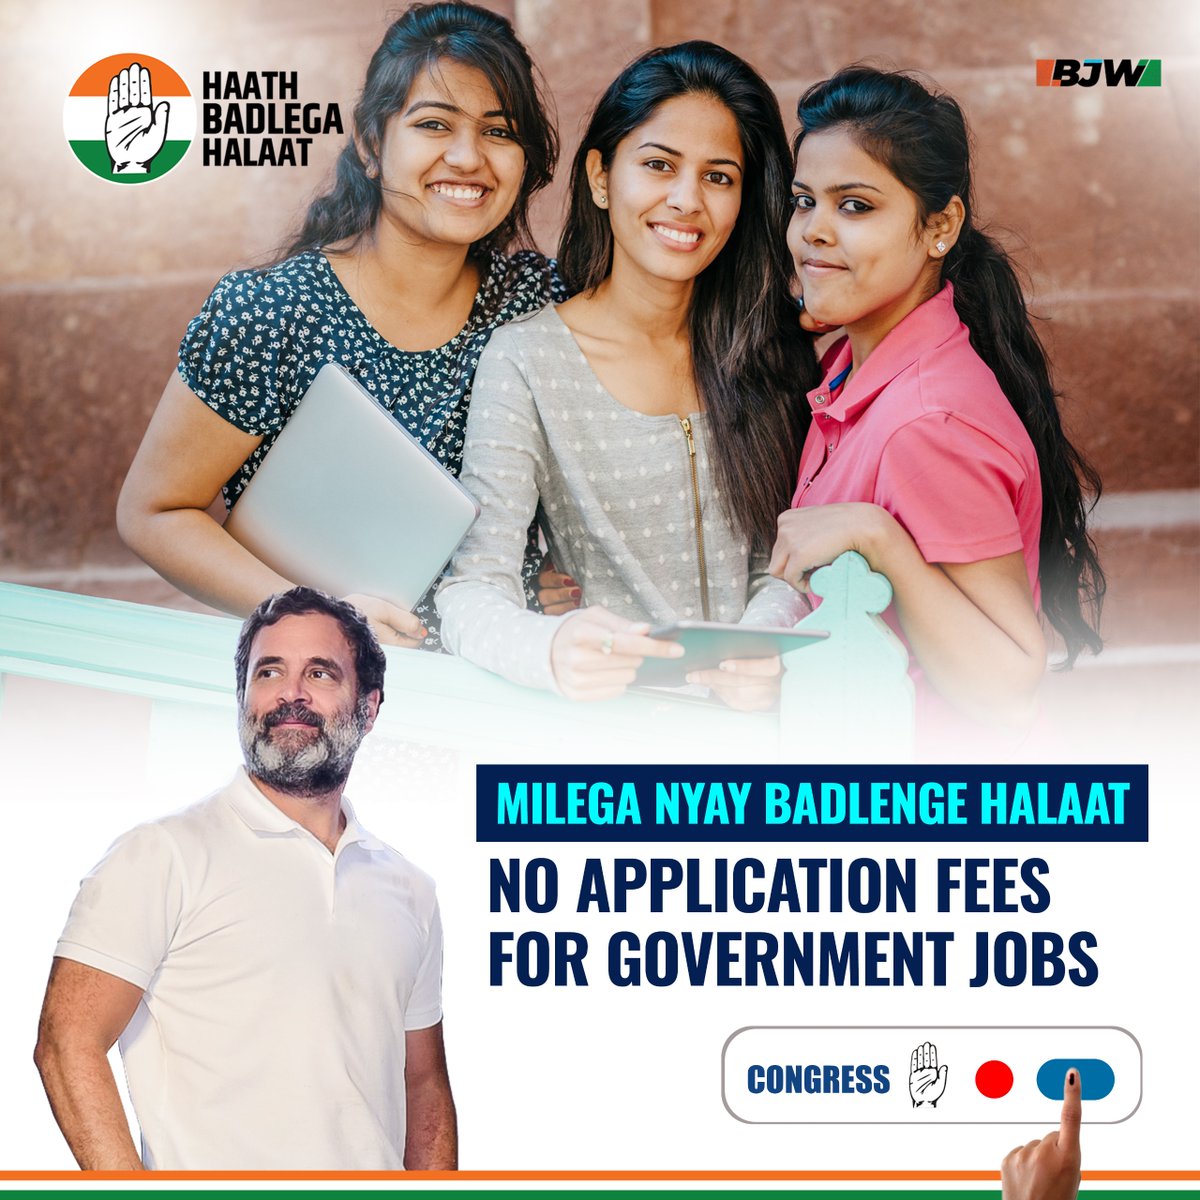 No application fees for government jobs. #StudentsLoanMaafi